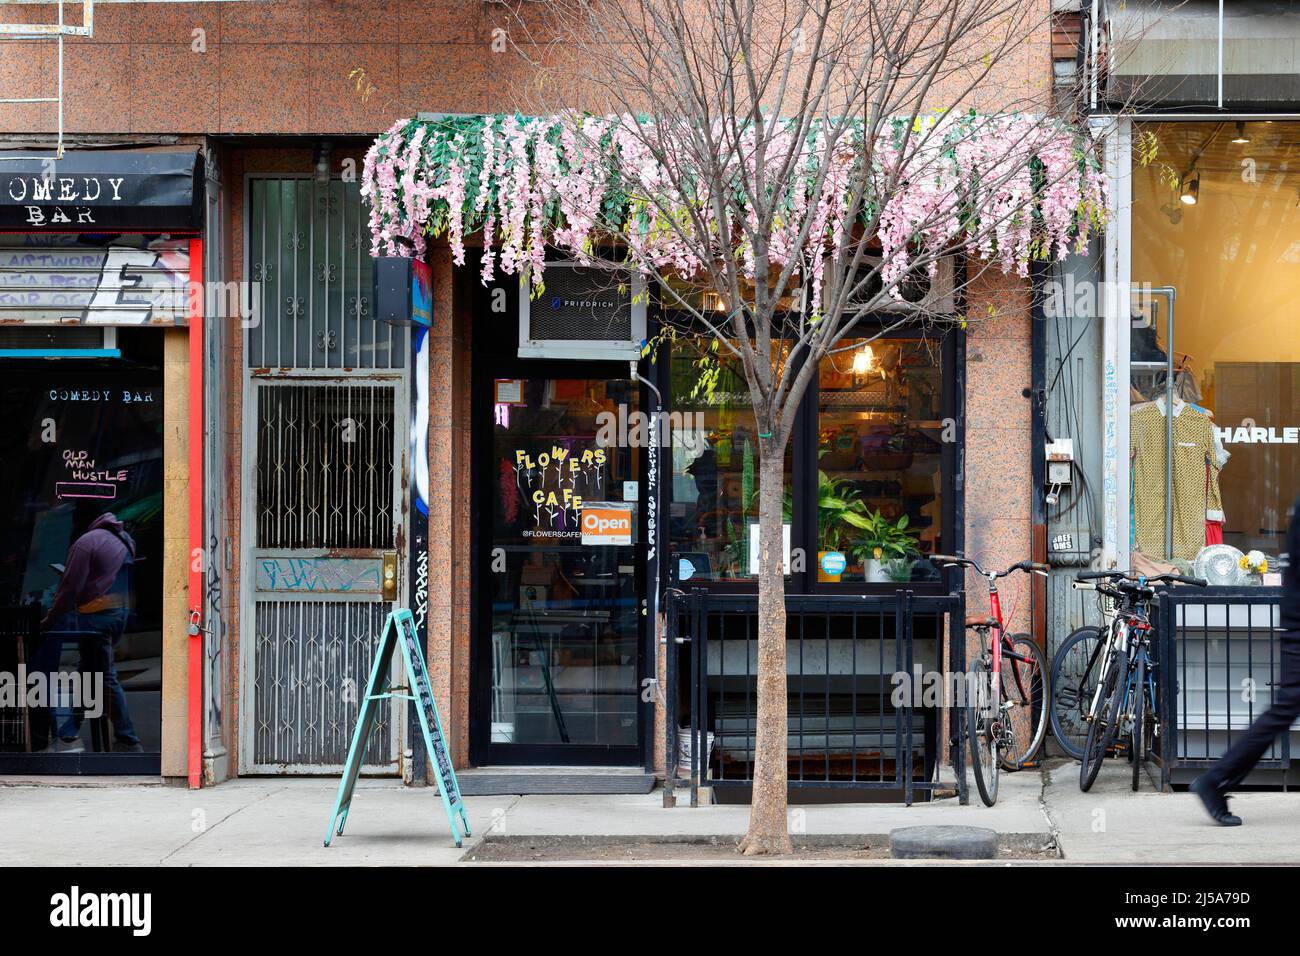 Flowers Cafe, 39 Essex St, New York, NYC storefront photo of a breakfast and lunch cafe in the Lower East Side neighborhood in Manhattan. Stock Photo